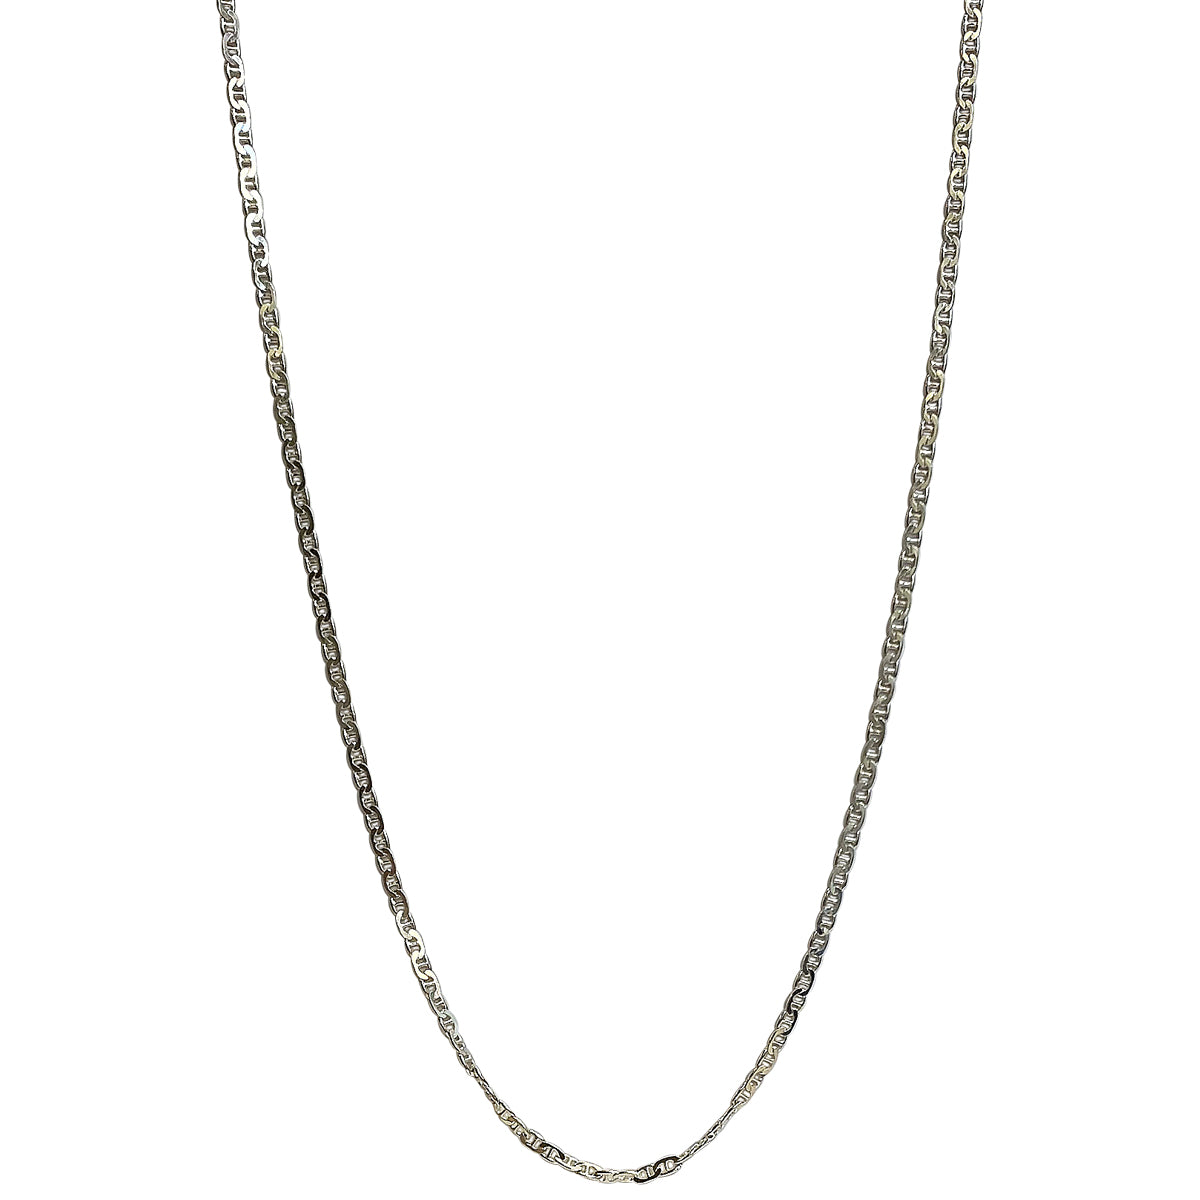 CURB TRACE CHAIN SILVER NECKLACE